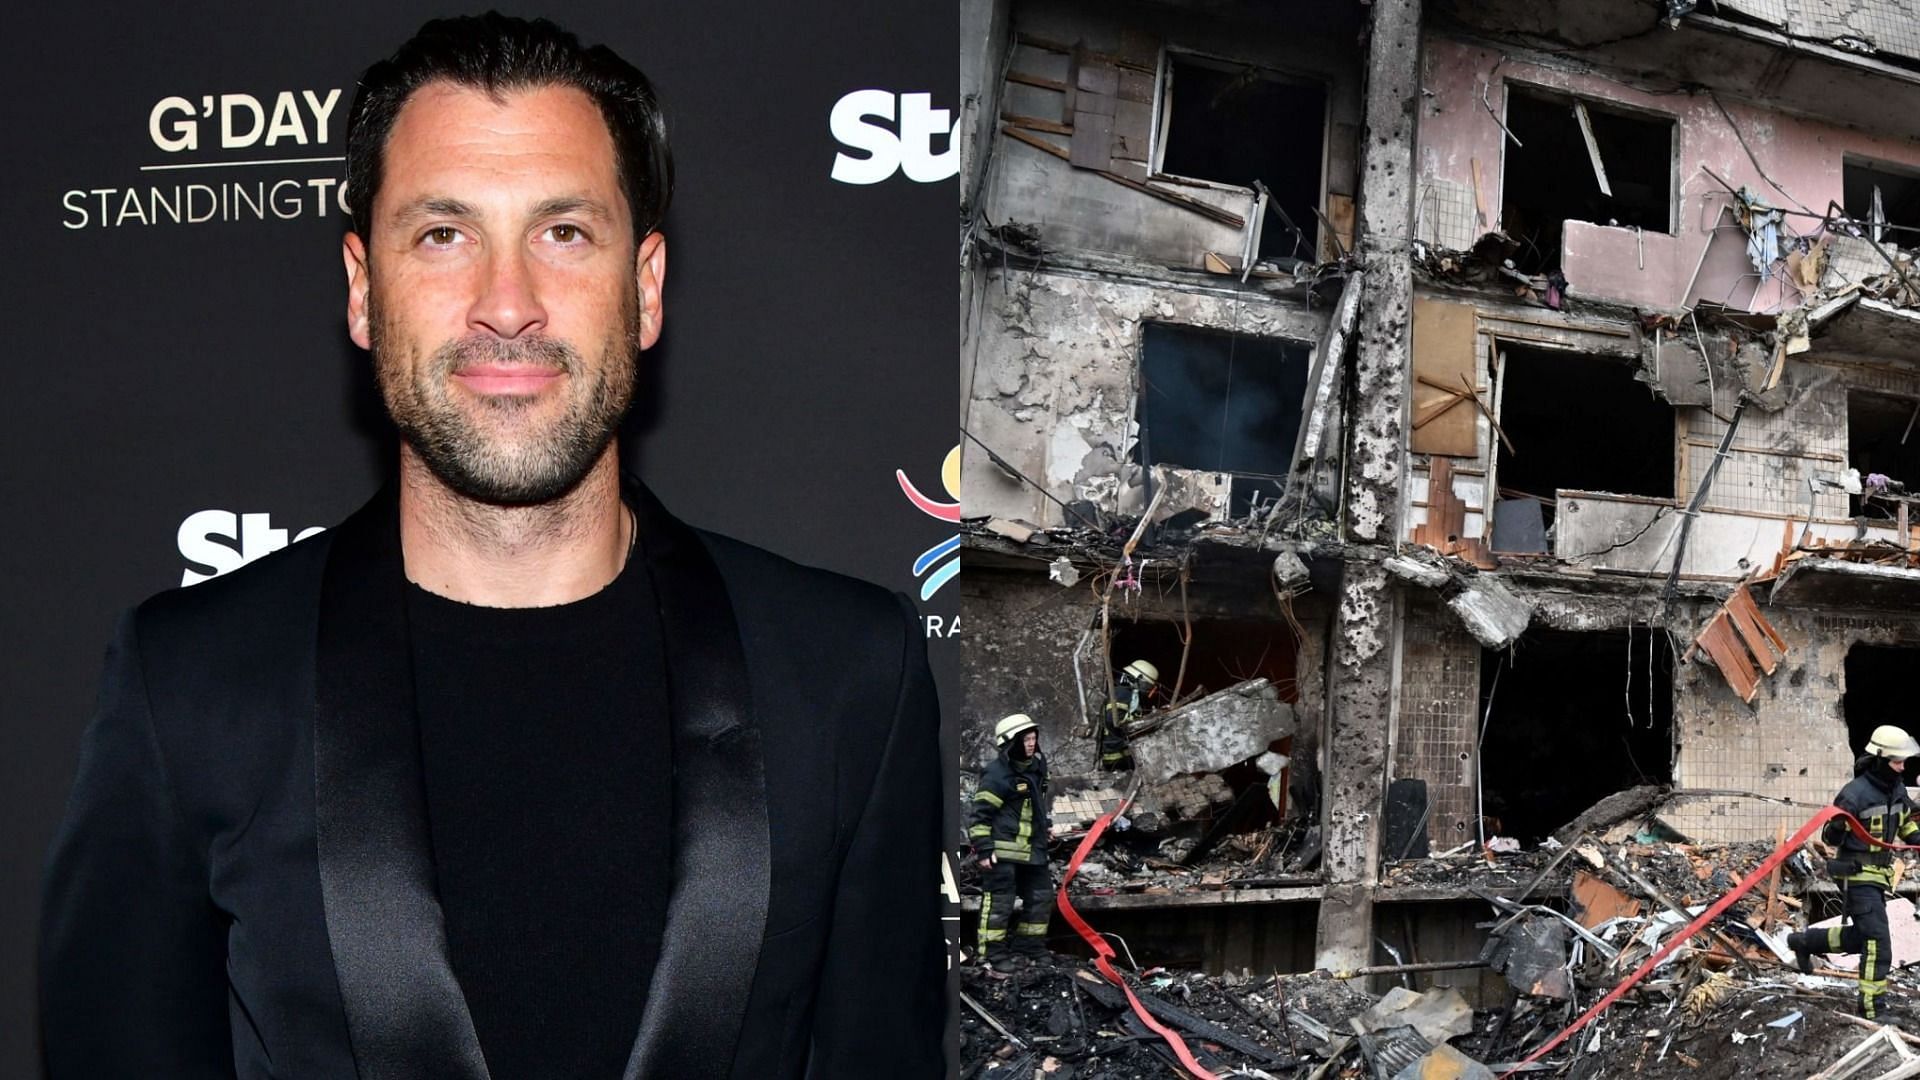 DWTS star Maksim Chmerkovskiy share tearful update from Kyiv amid Russia-Ukraine conflict (Image via Rodin Eckenroth/Getty Images and Genya Savilov/Getty Images)